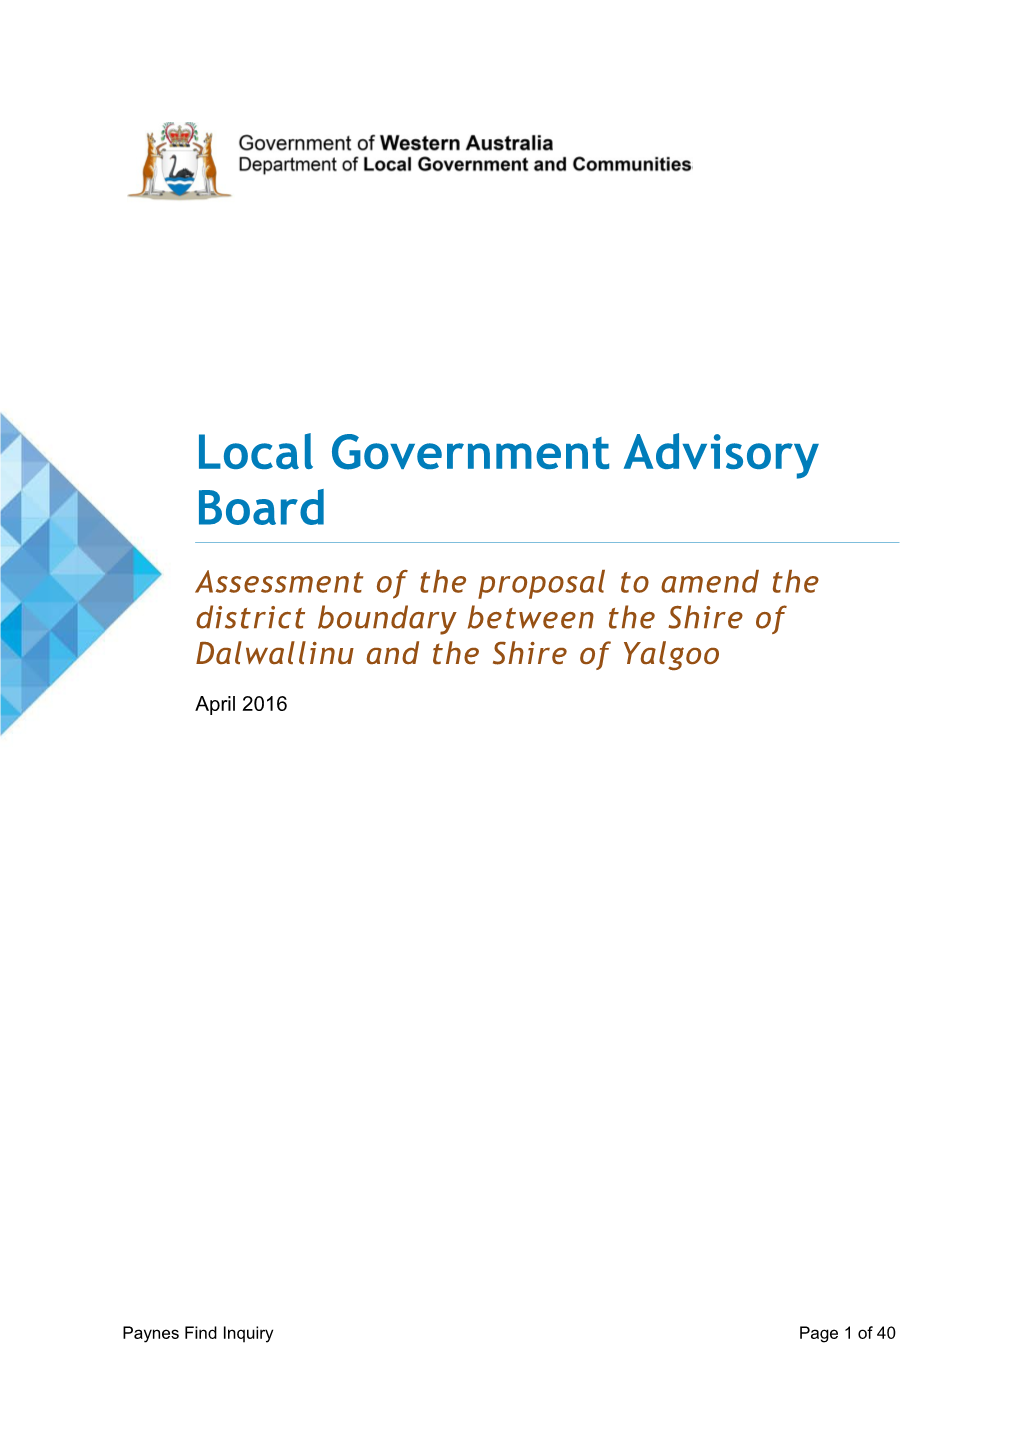 LGAB Assessment of the Proposal to Amend the District Boundary Between the Shire of Dalwallinu